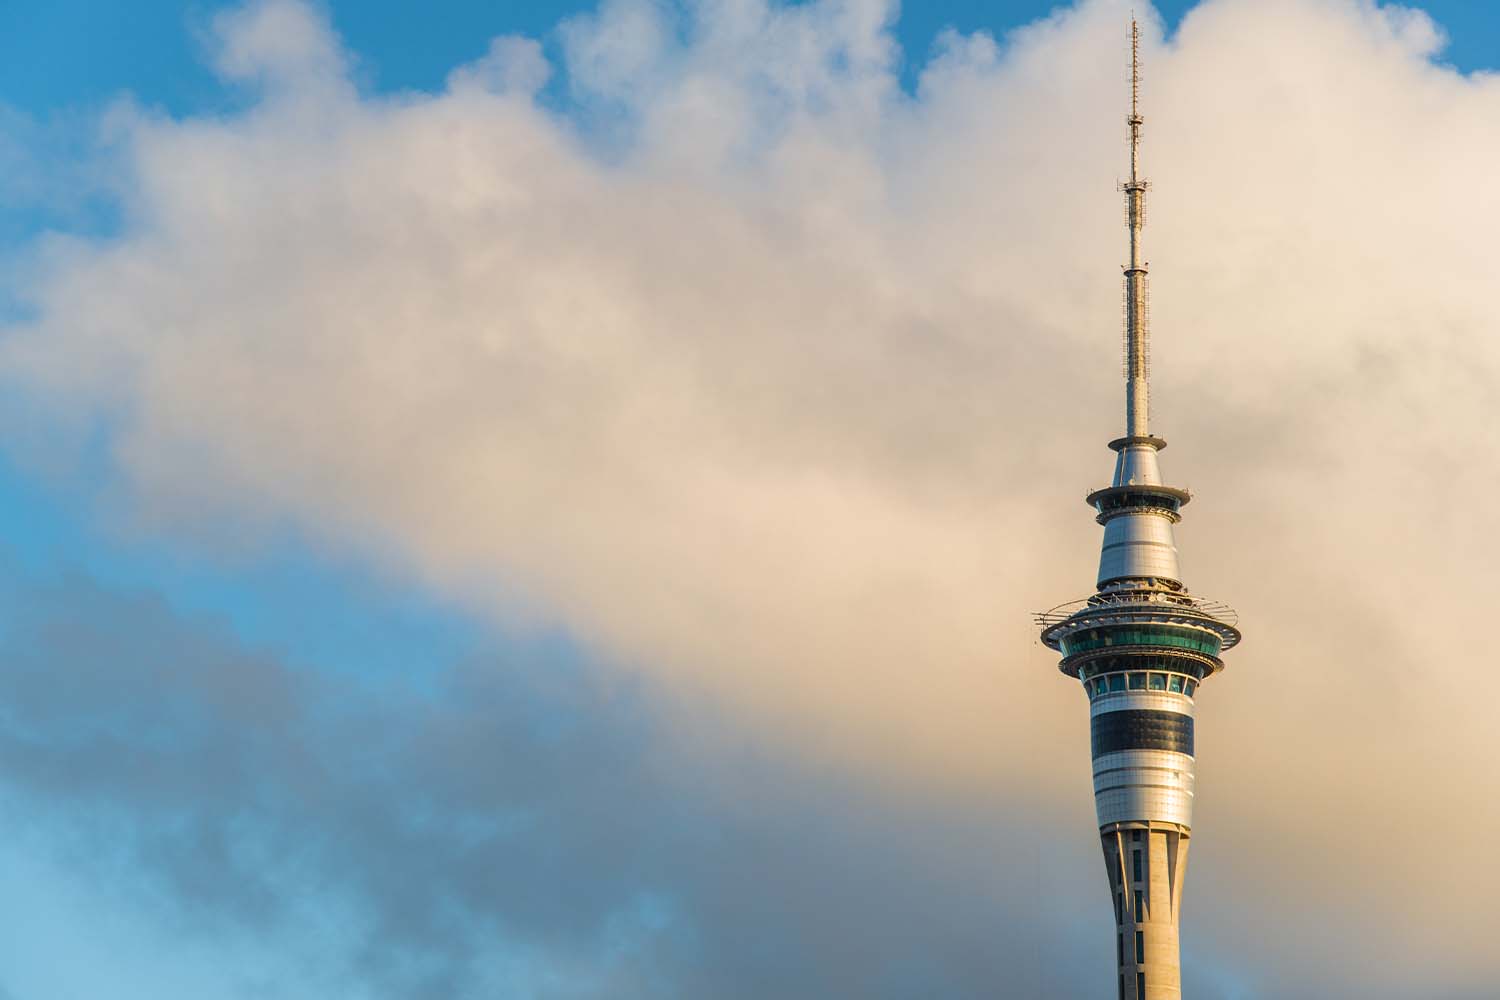 The Sky Tower is the tallest man-made structure in New Zealand